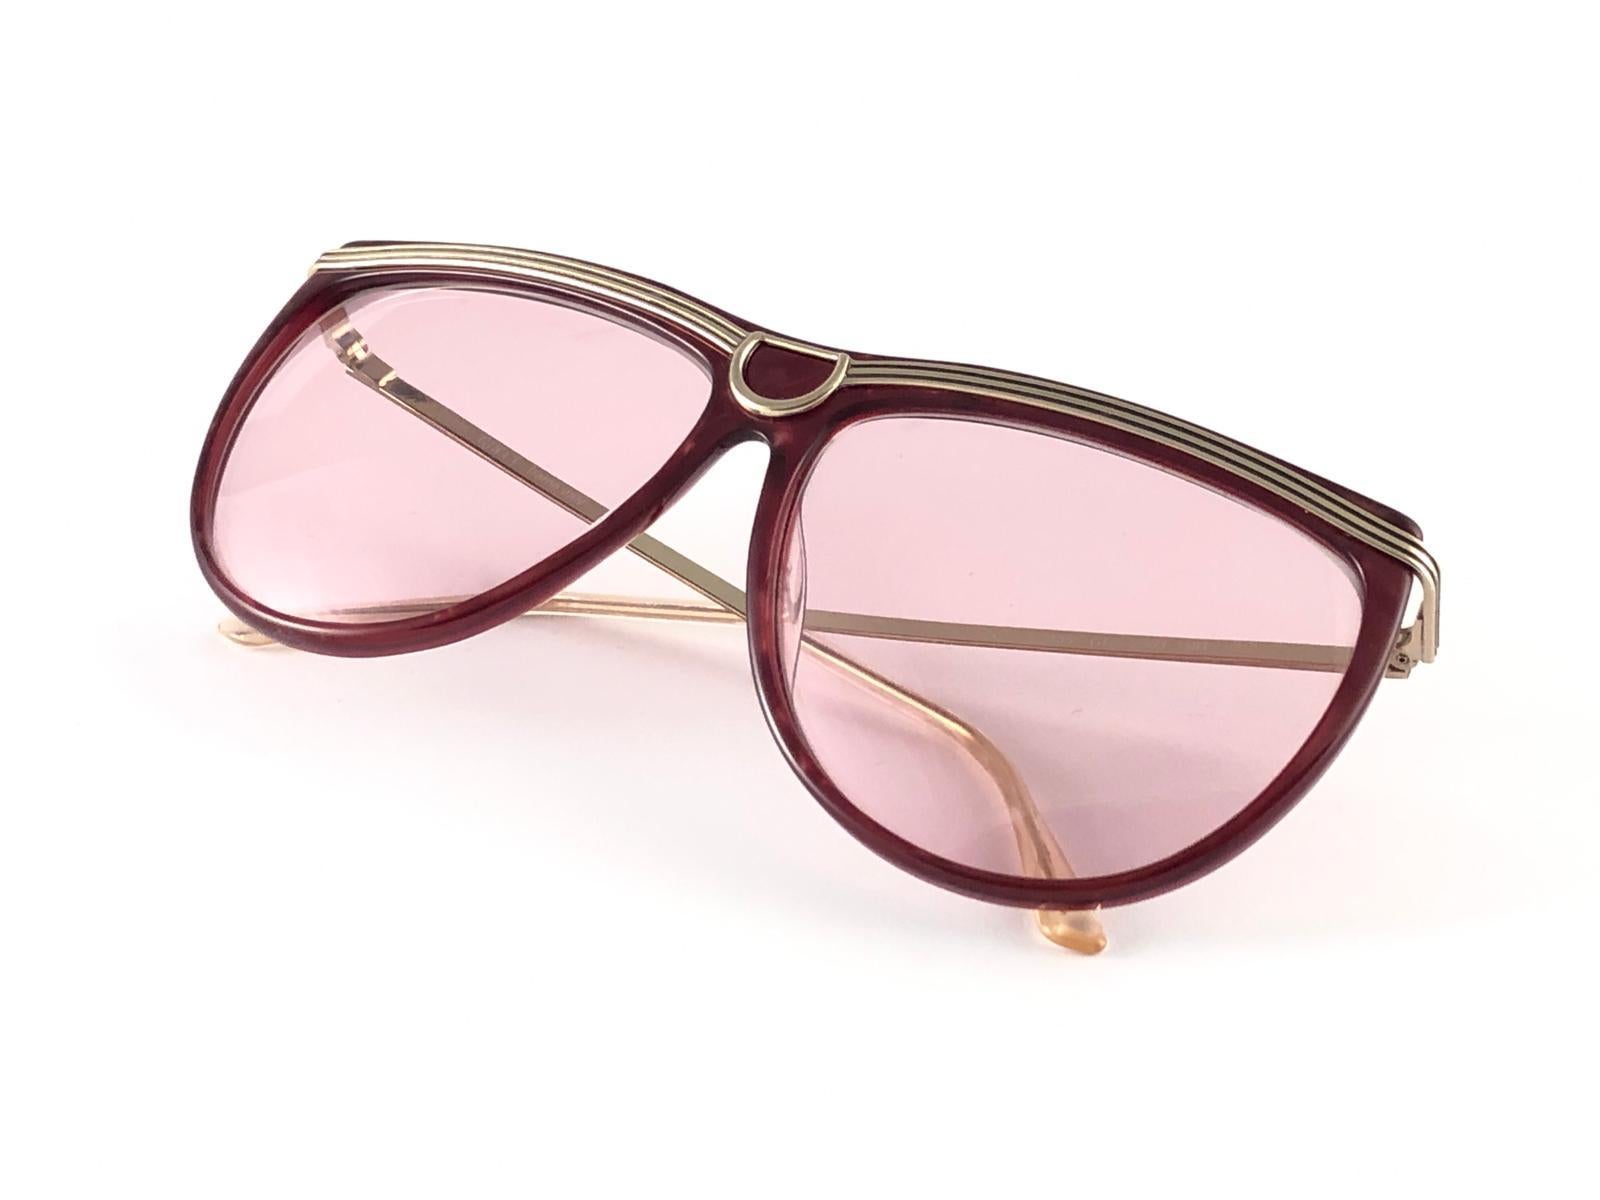 Women's or Men's New Vintage Gucci 2303 Gold & Burgundy Accents Sunglasses 1980's Made in Italy For Sale